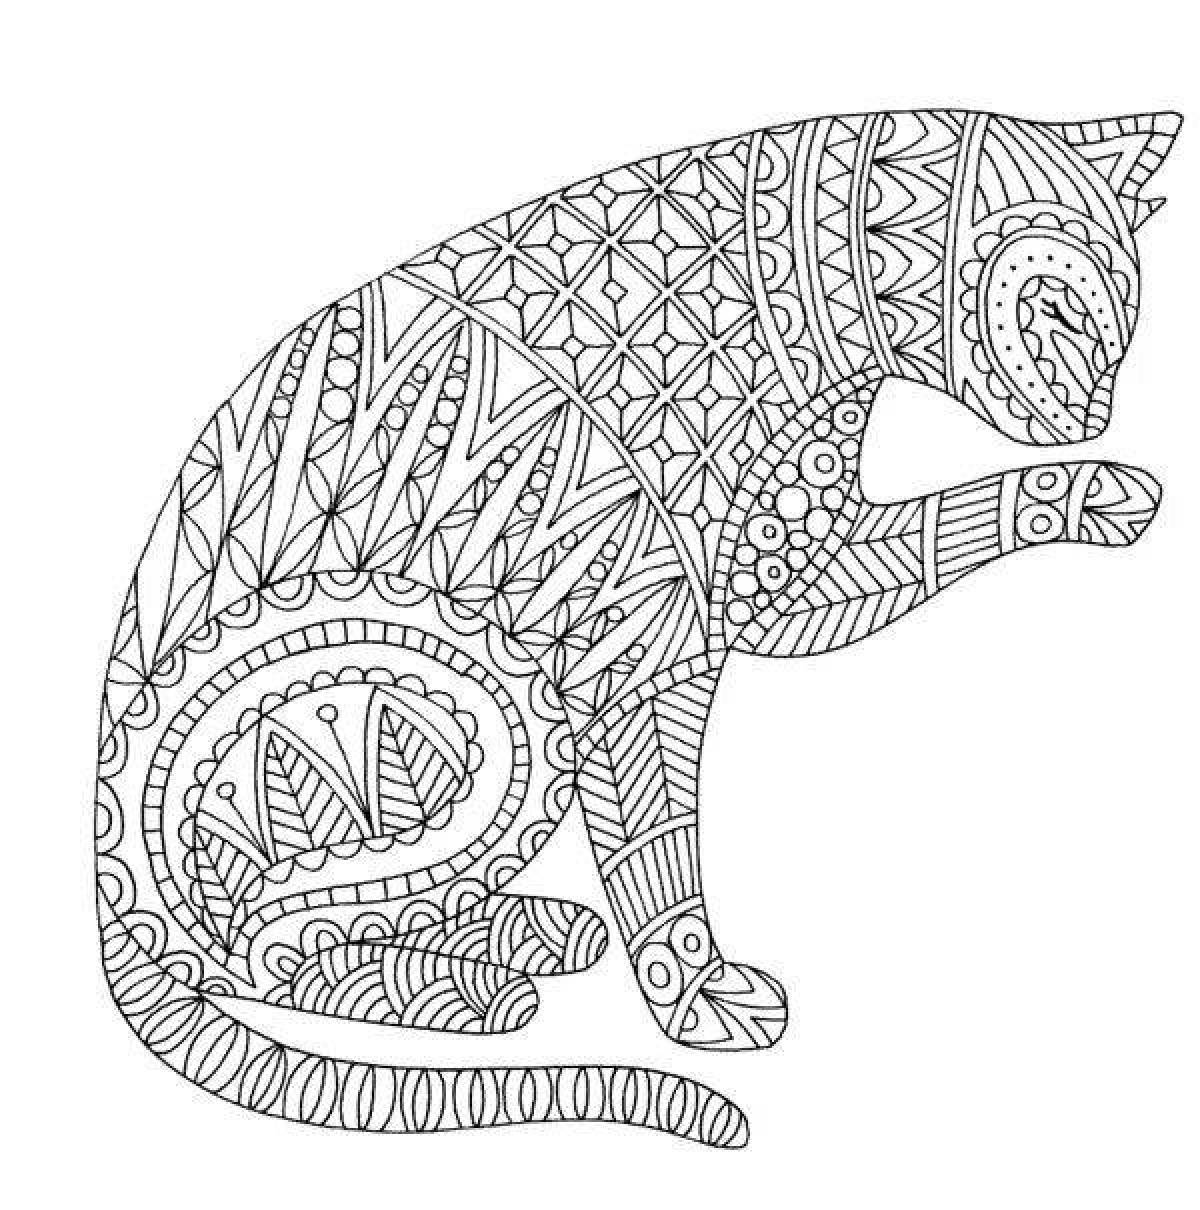 Awesome spiral cat coloring page